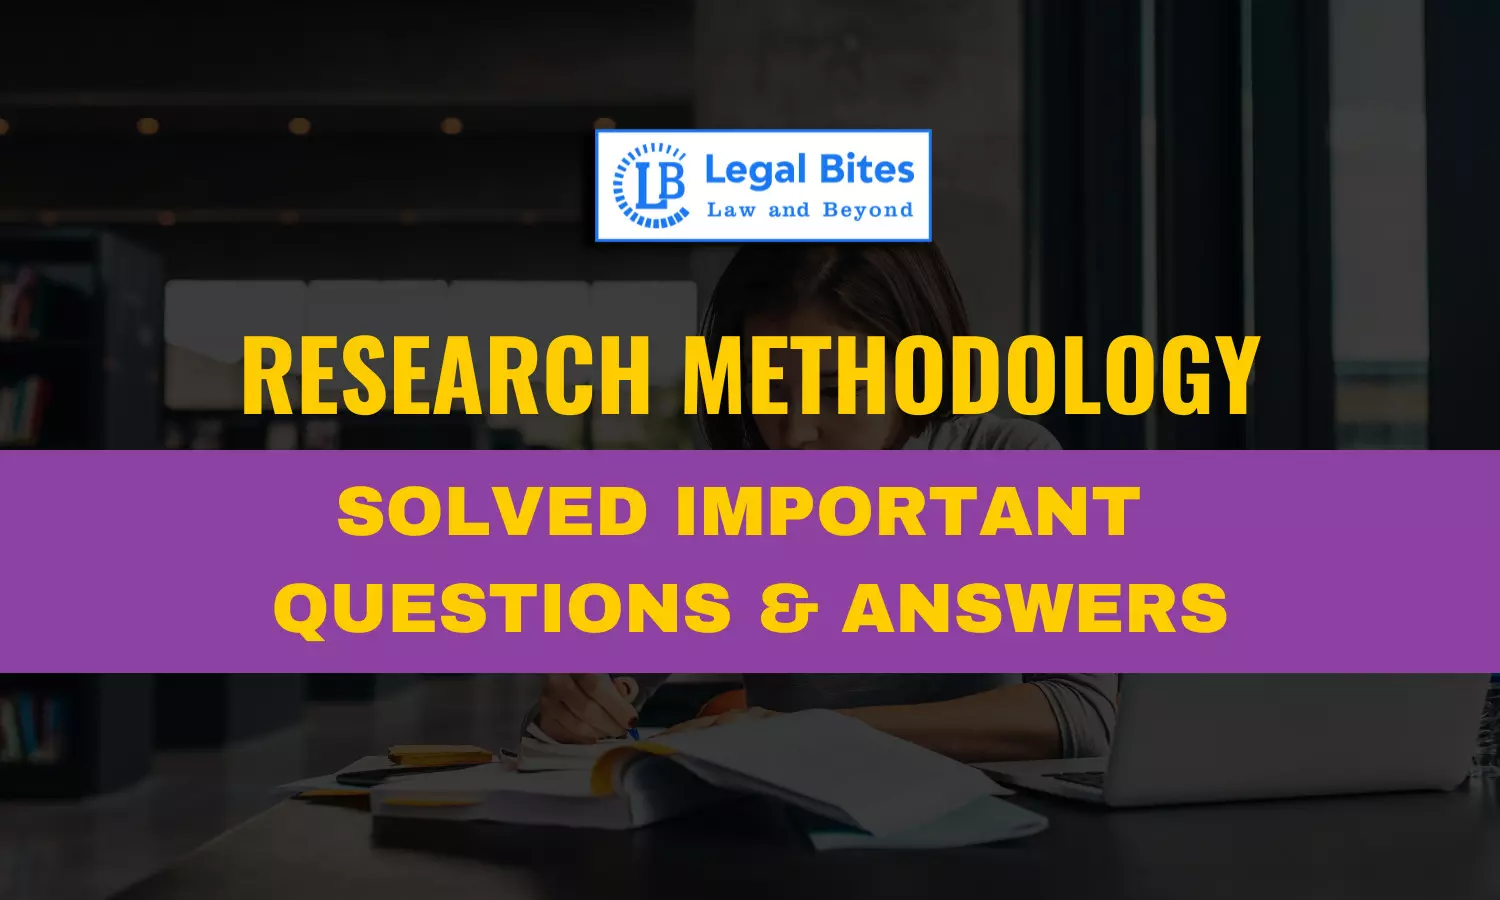 Write short notes on the significance of Foreign Decisions in Legal Research.